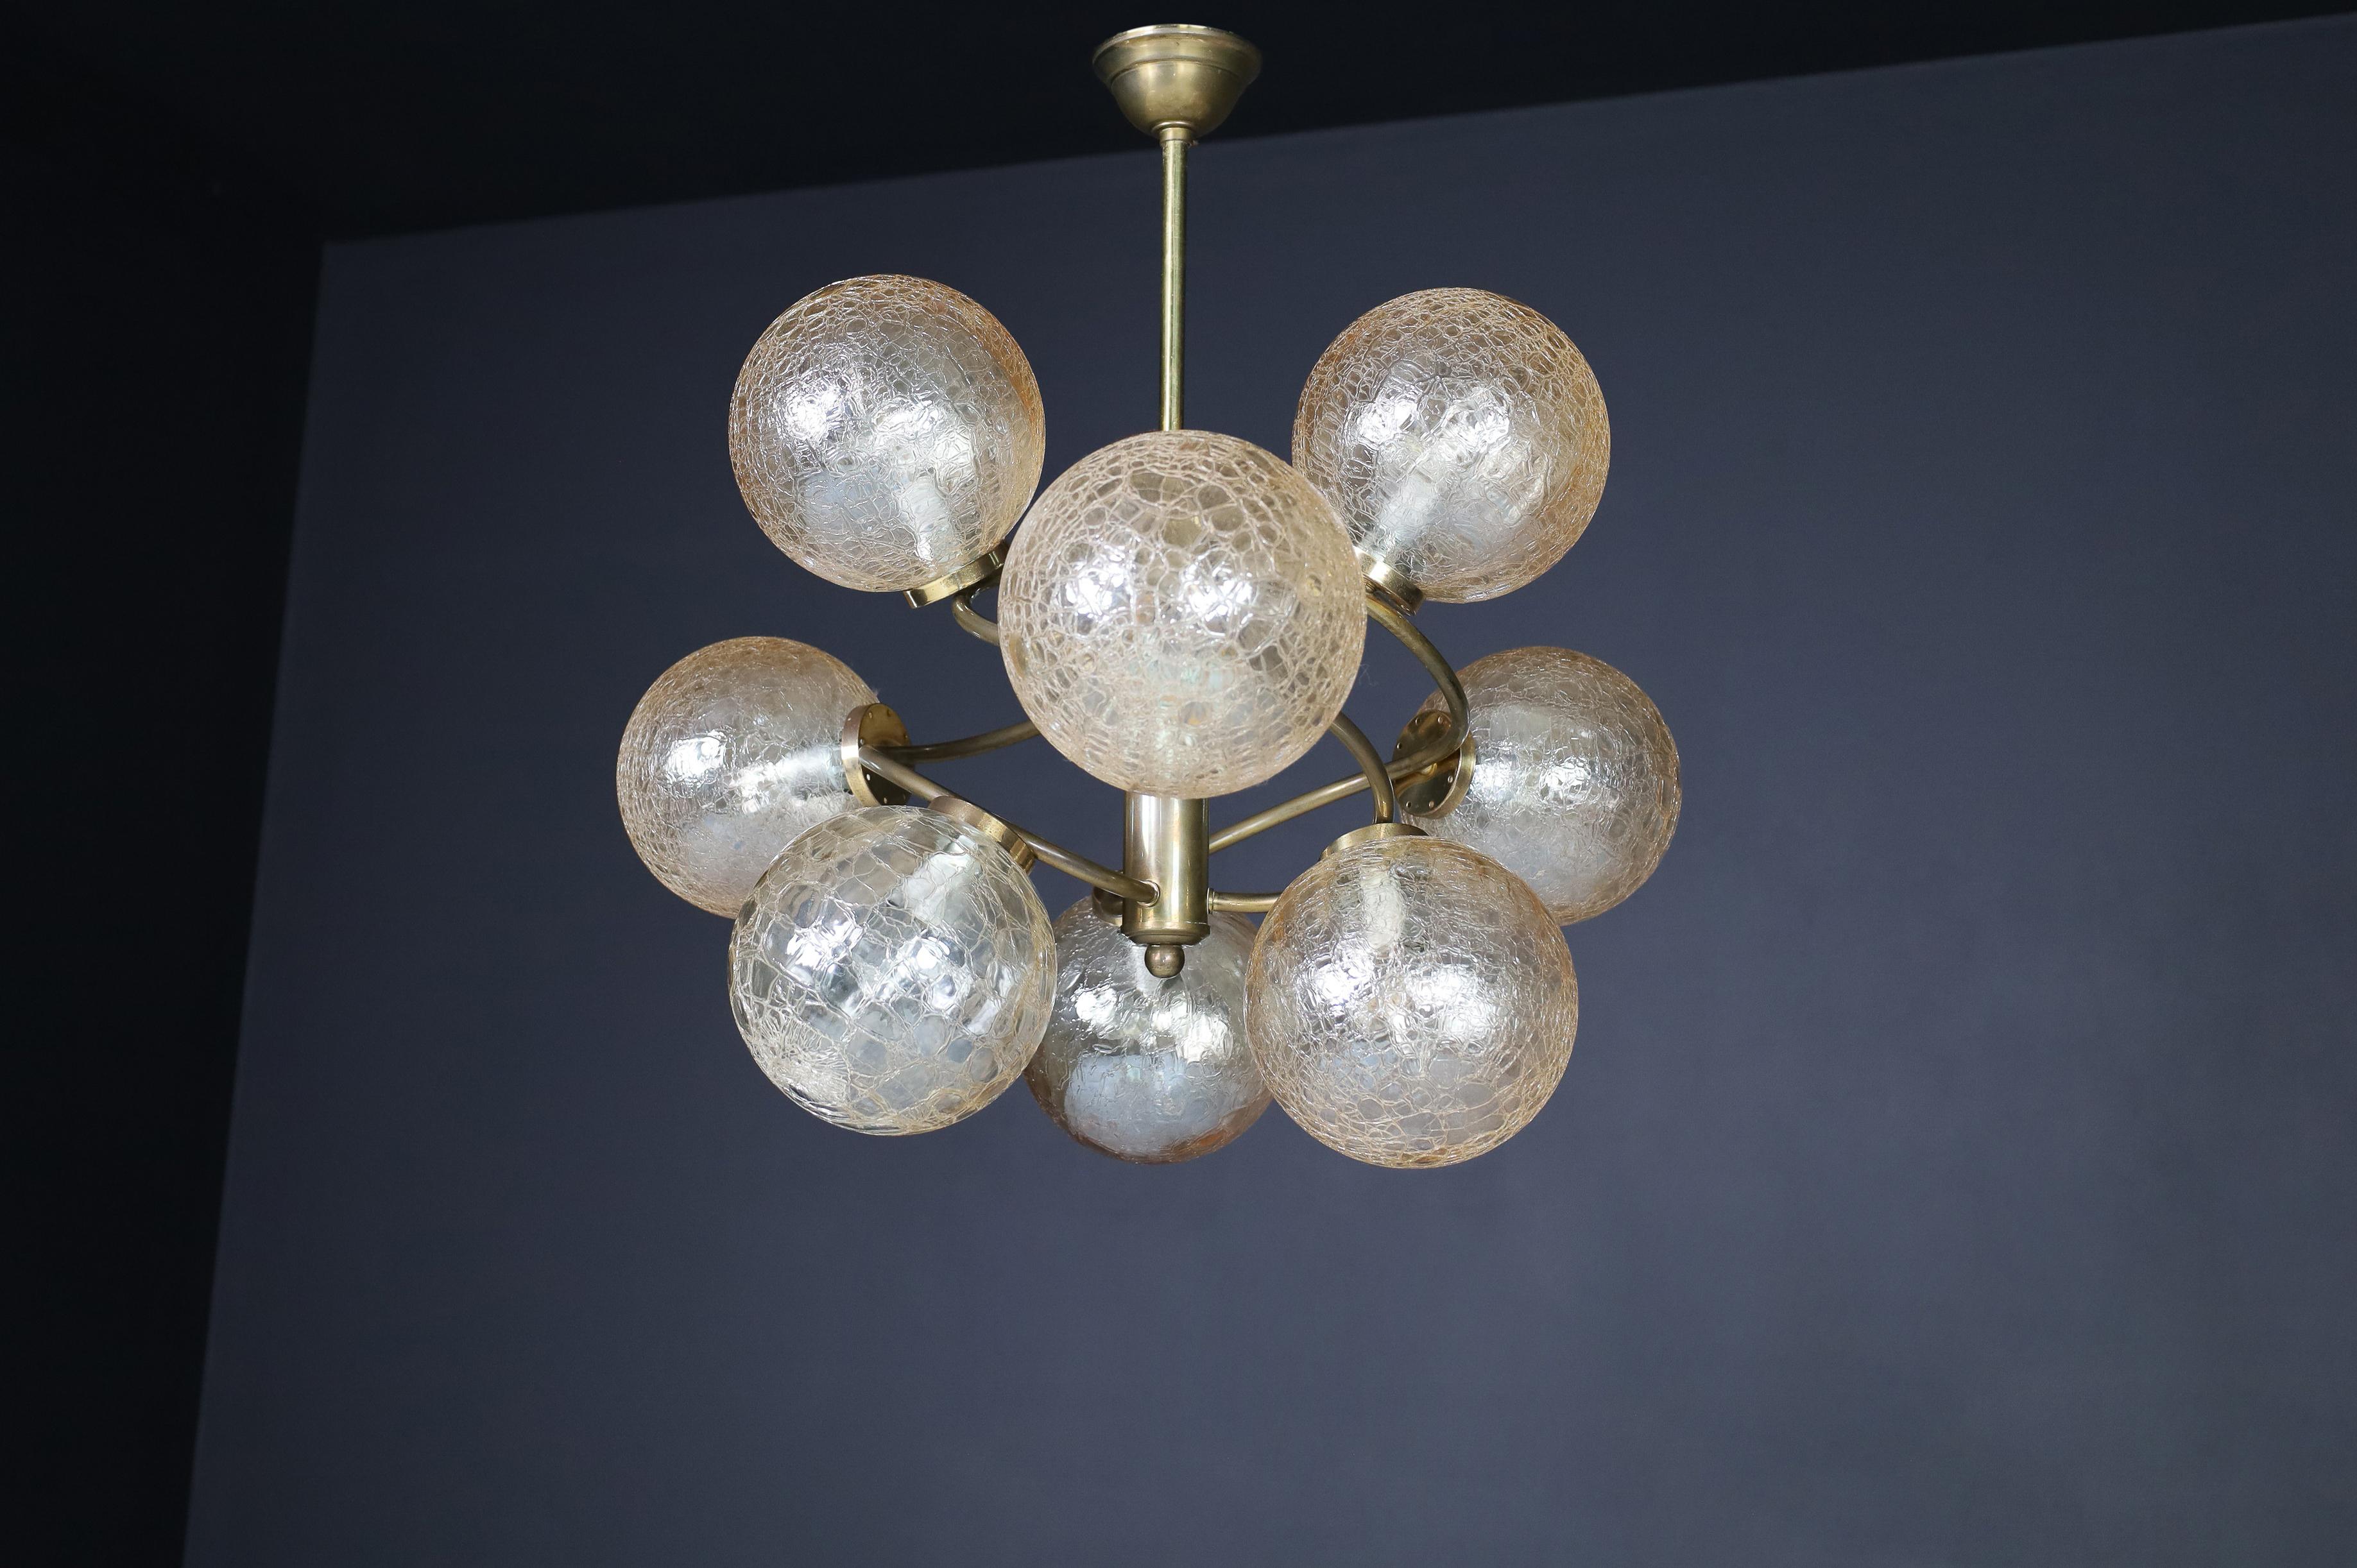 Patinated Brass Chandelier Wit Nine Amber-Colored Globes, Germany 1960s For Sale 5